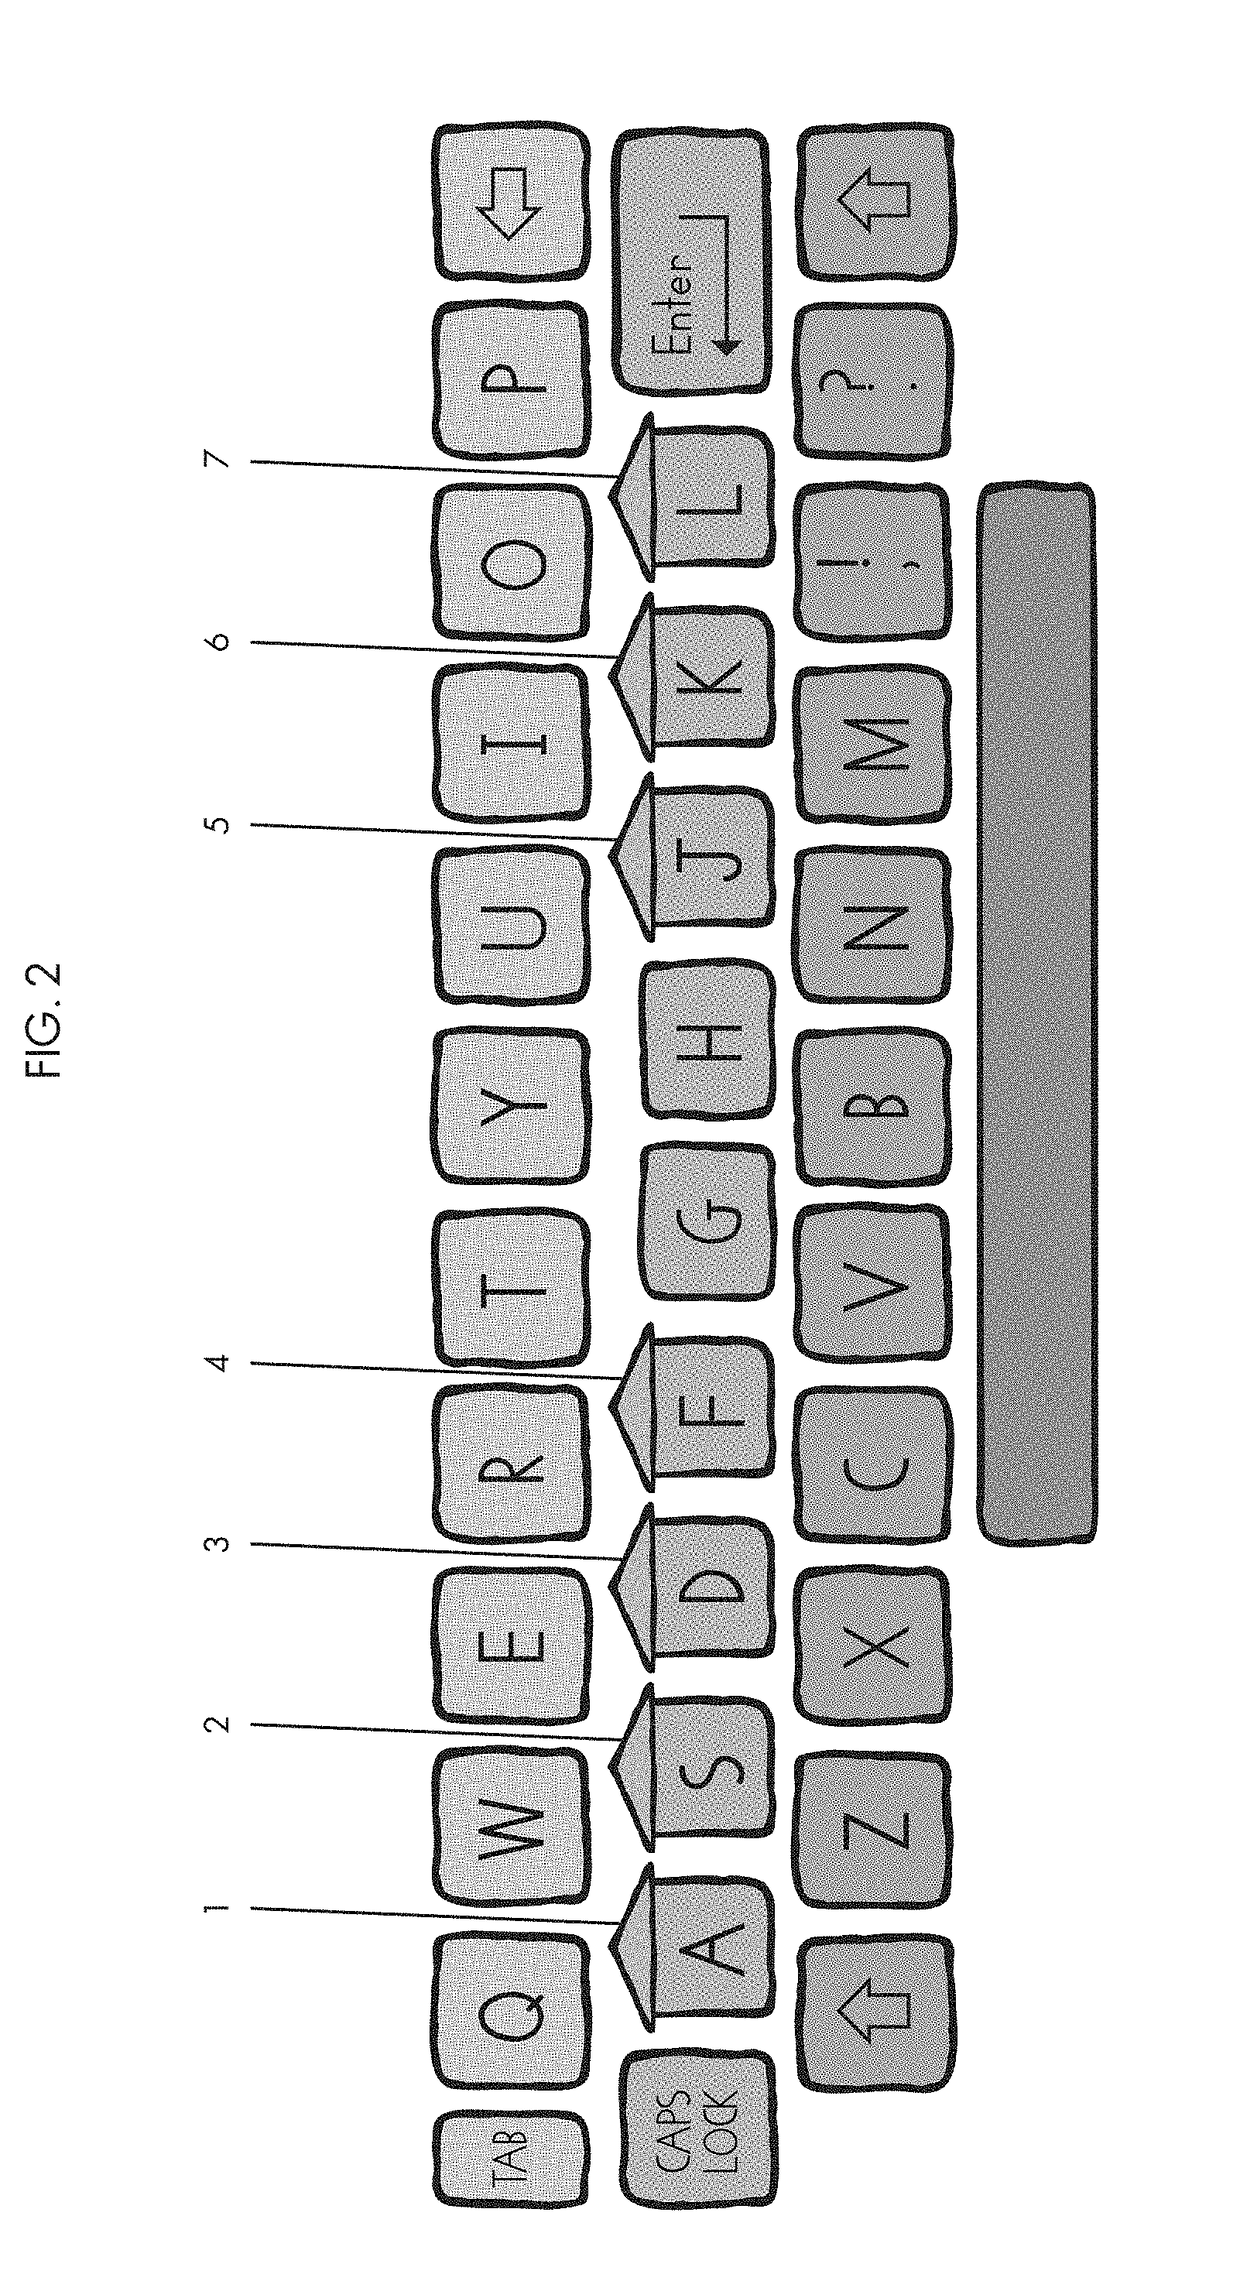 System and method for teaching pre-keyboarding and keyboarding